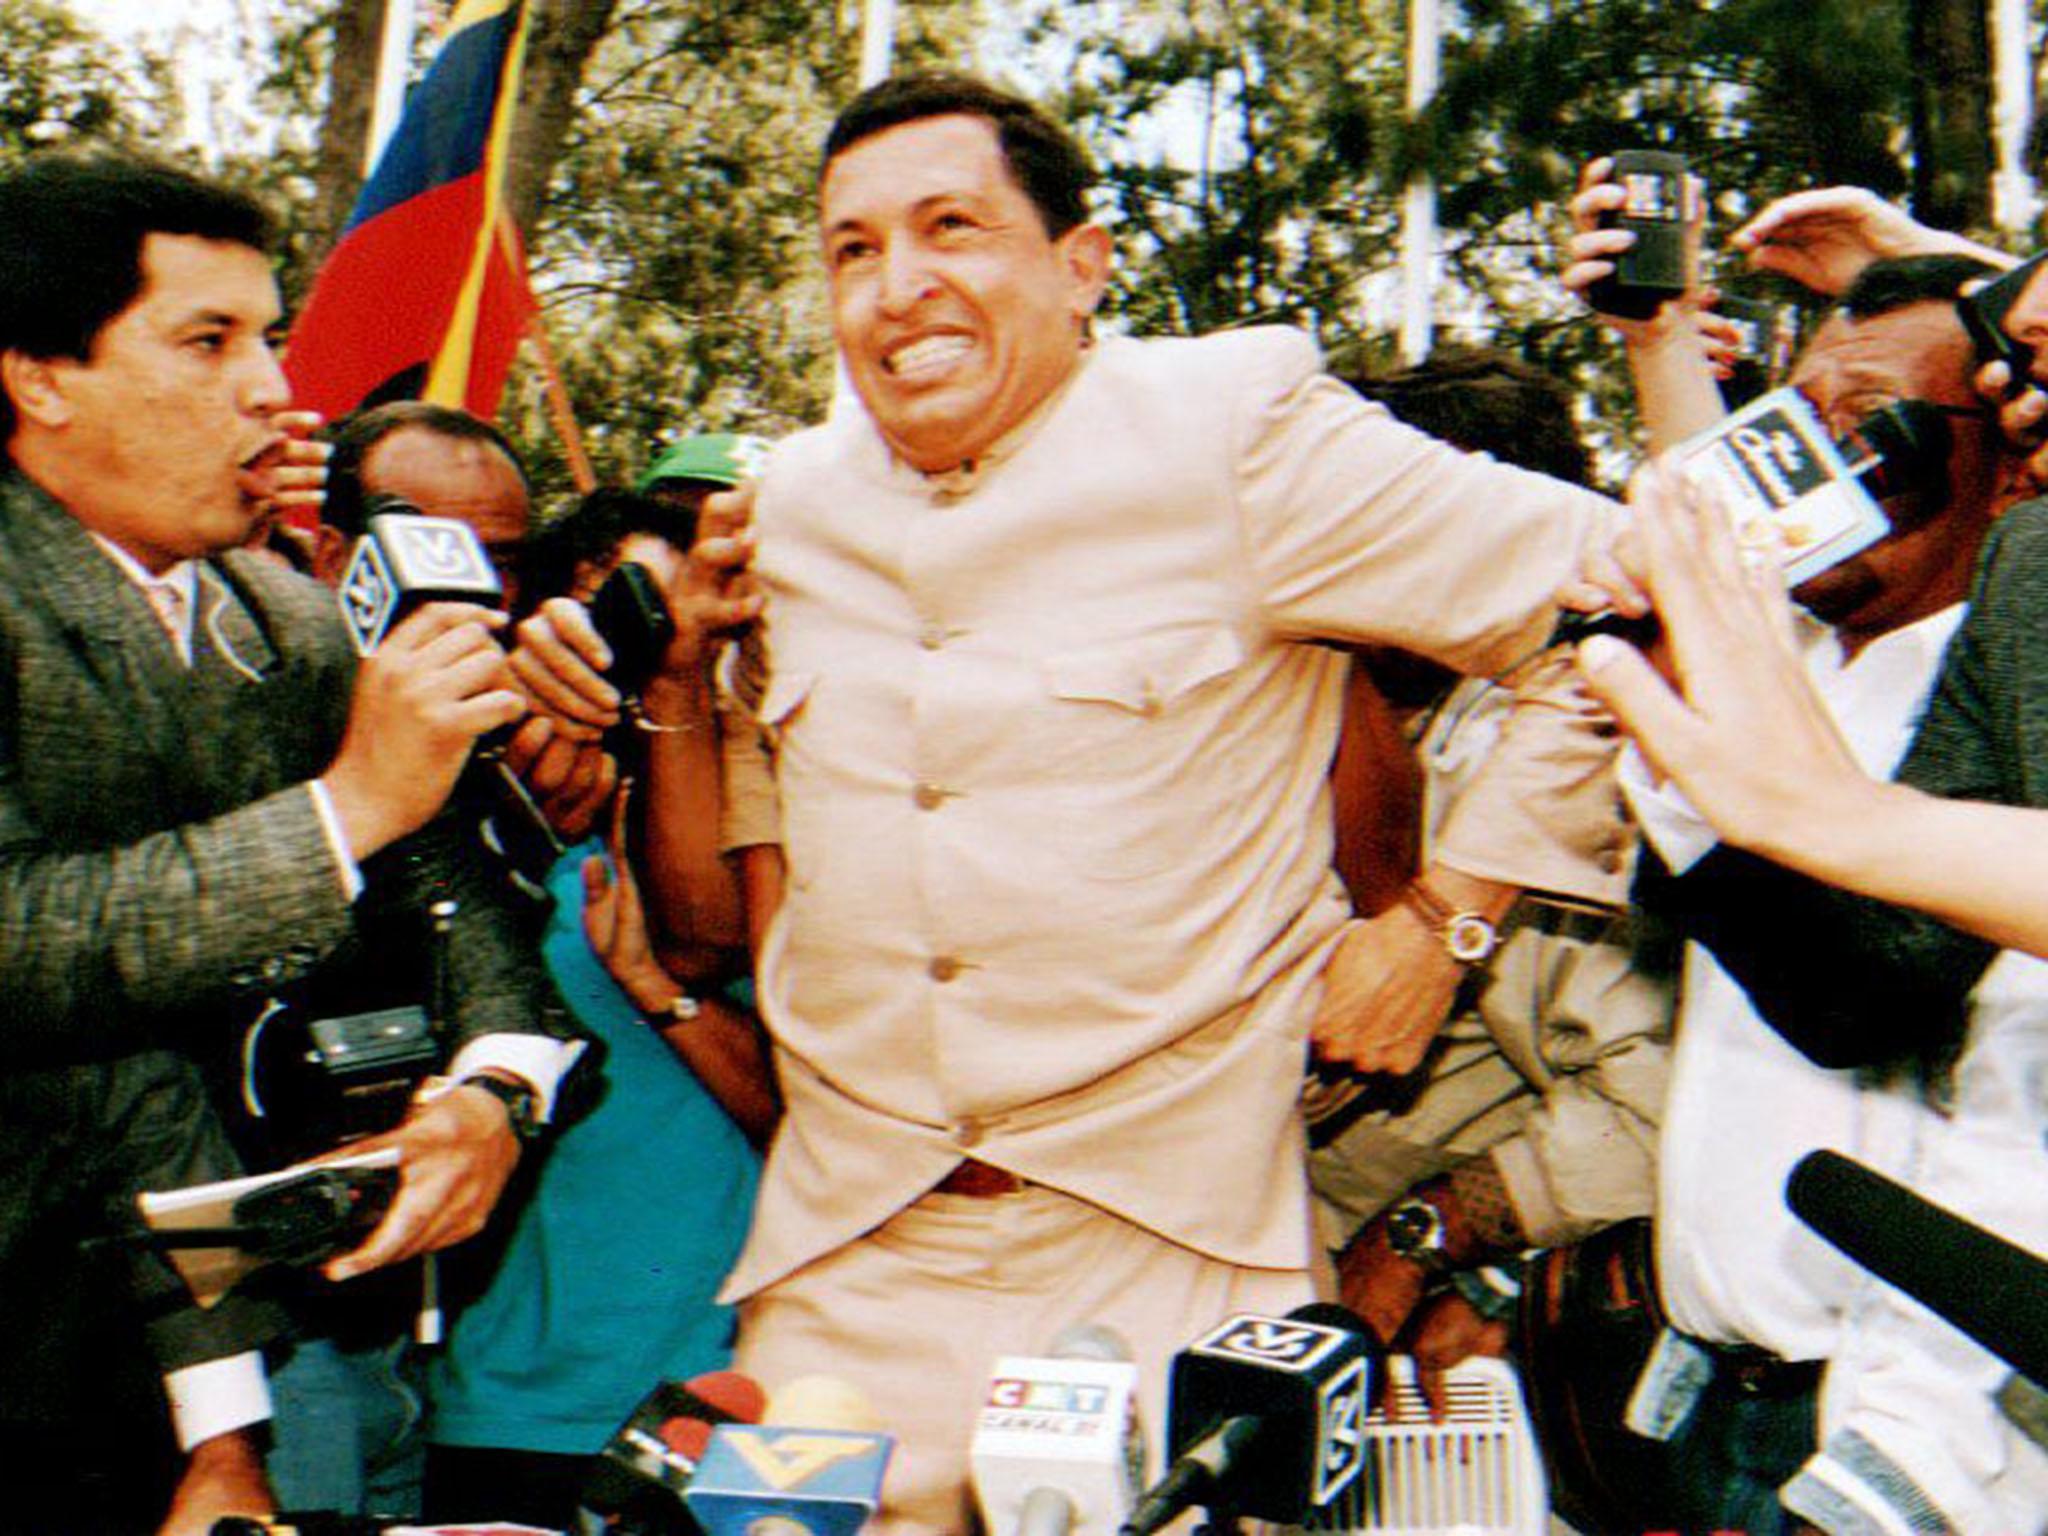 Chavez in March 1994 after his release from jail